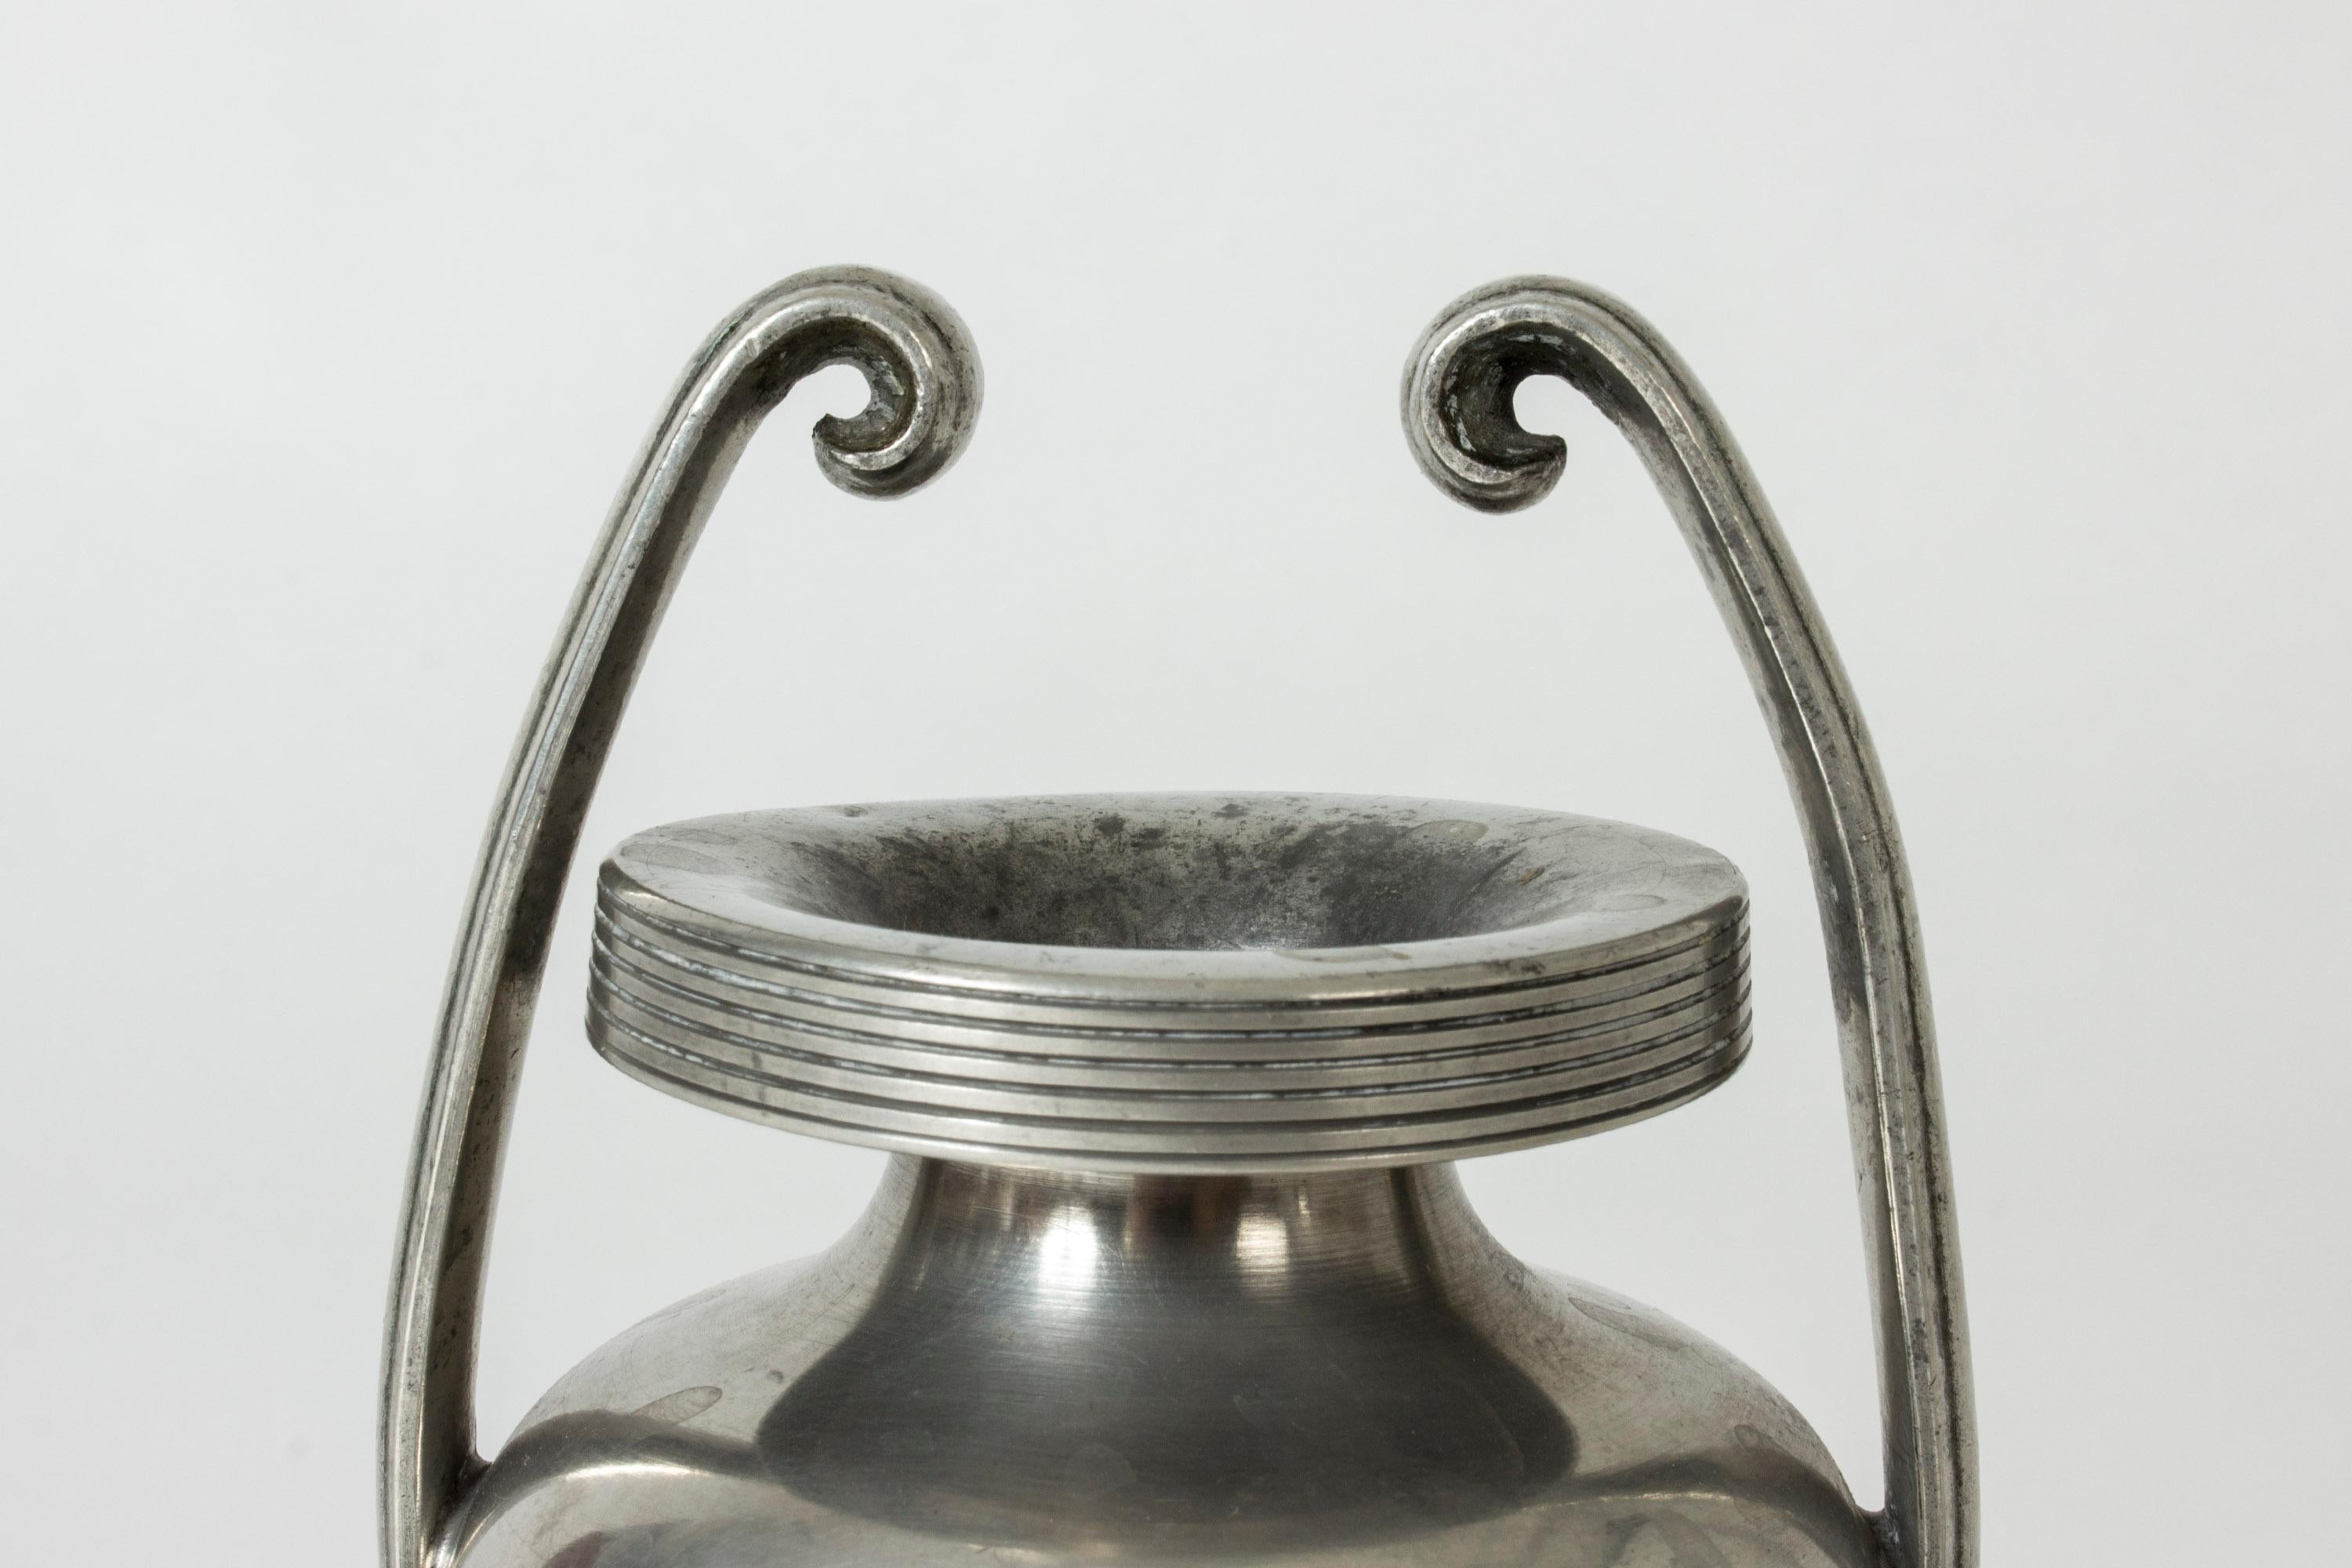 Mid-20th Century Swedish Pewter Vase by Sylvia Stave for C. G. Hallberg, 1933